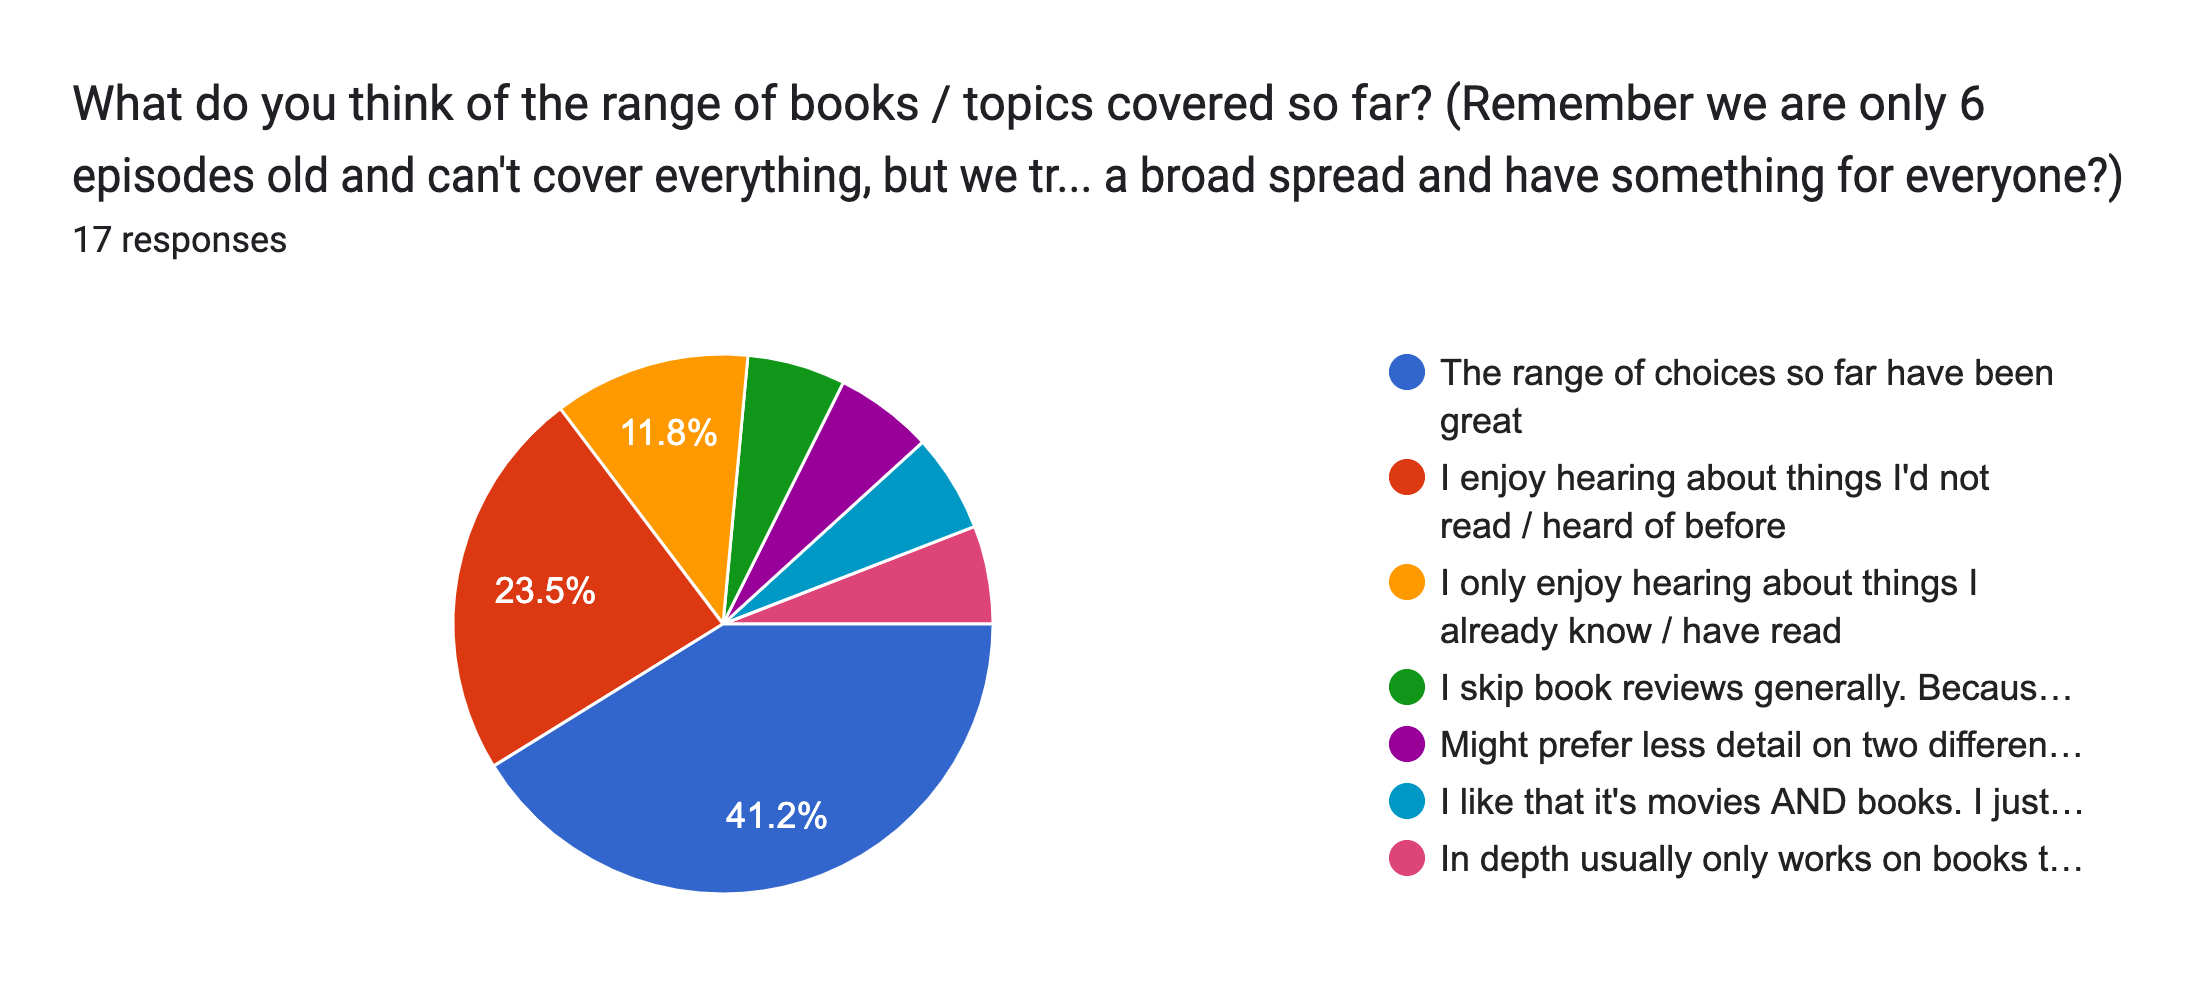 Forms response chart. Question title: What do you think of the range of books / topics covered so far? (Remember we are only 6 episodes old and can't cover everything, but we try to give a broad spread and have something for everyone?). Number of responses: 17 responses.